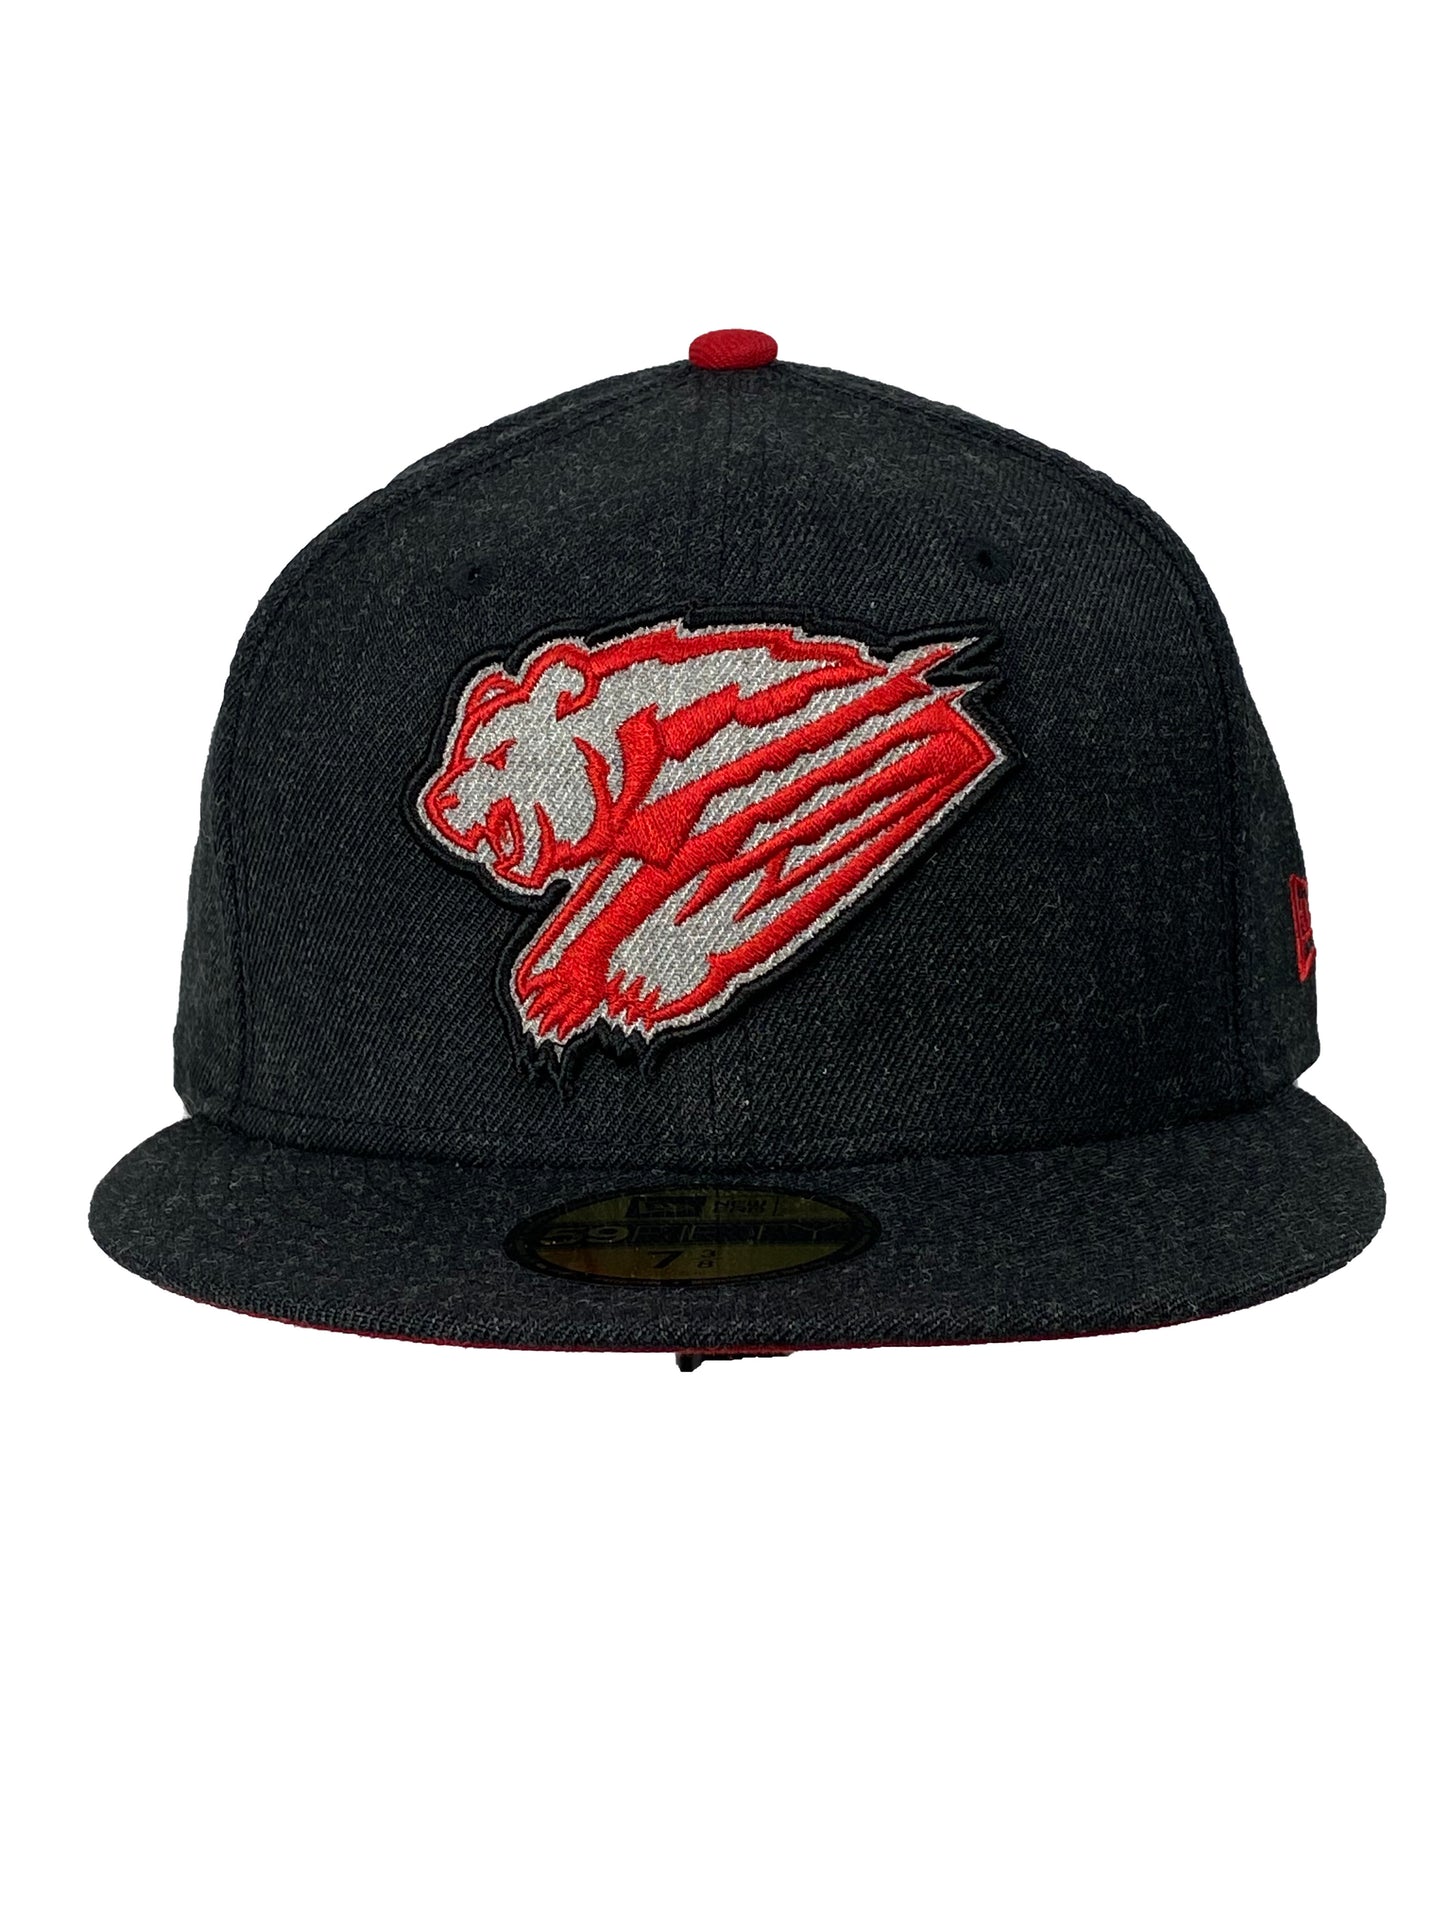 FRESNO GRIZZLIES HEATHER 59FIFTY FITTED